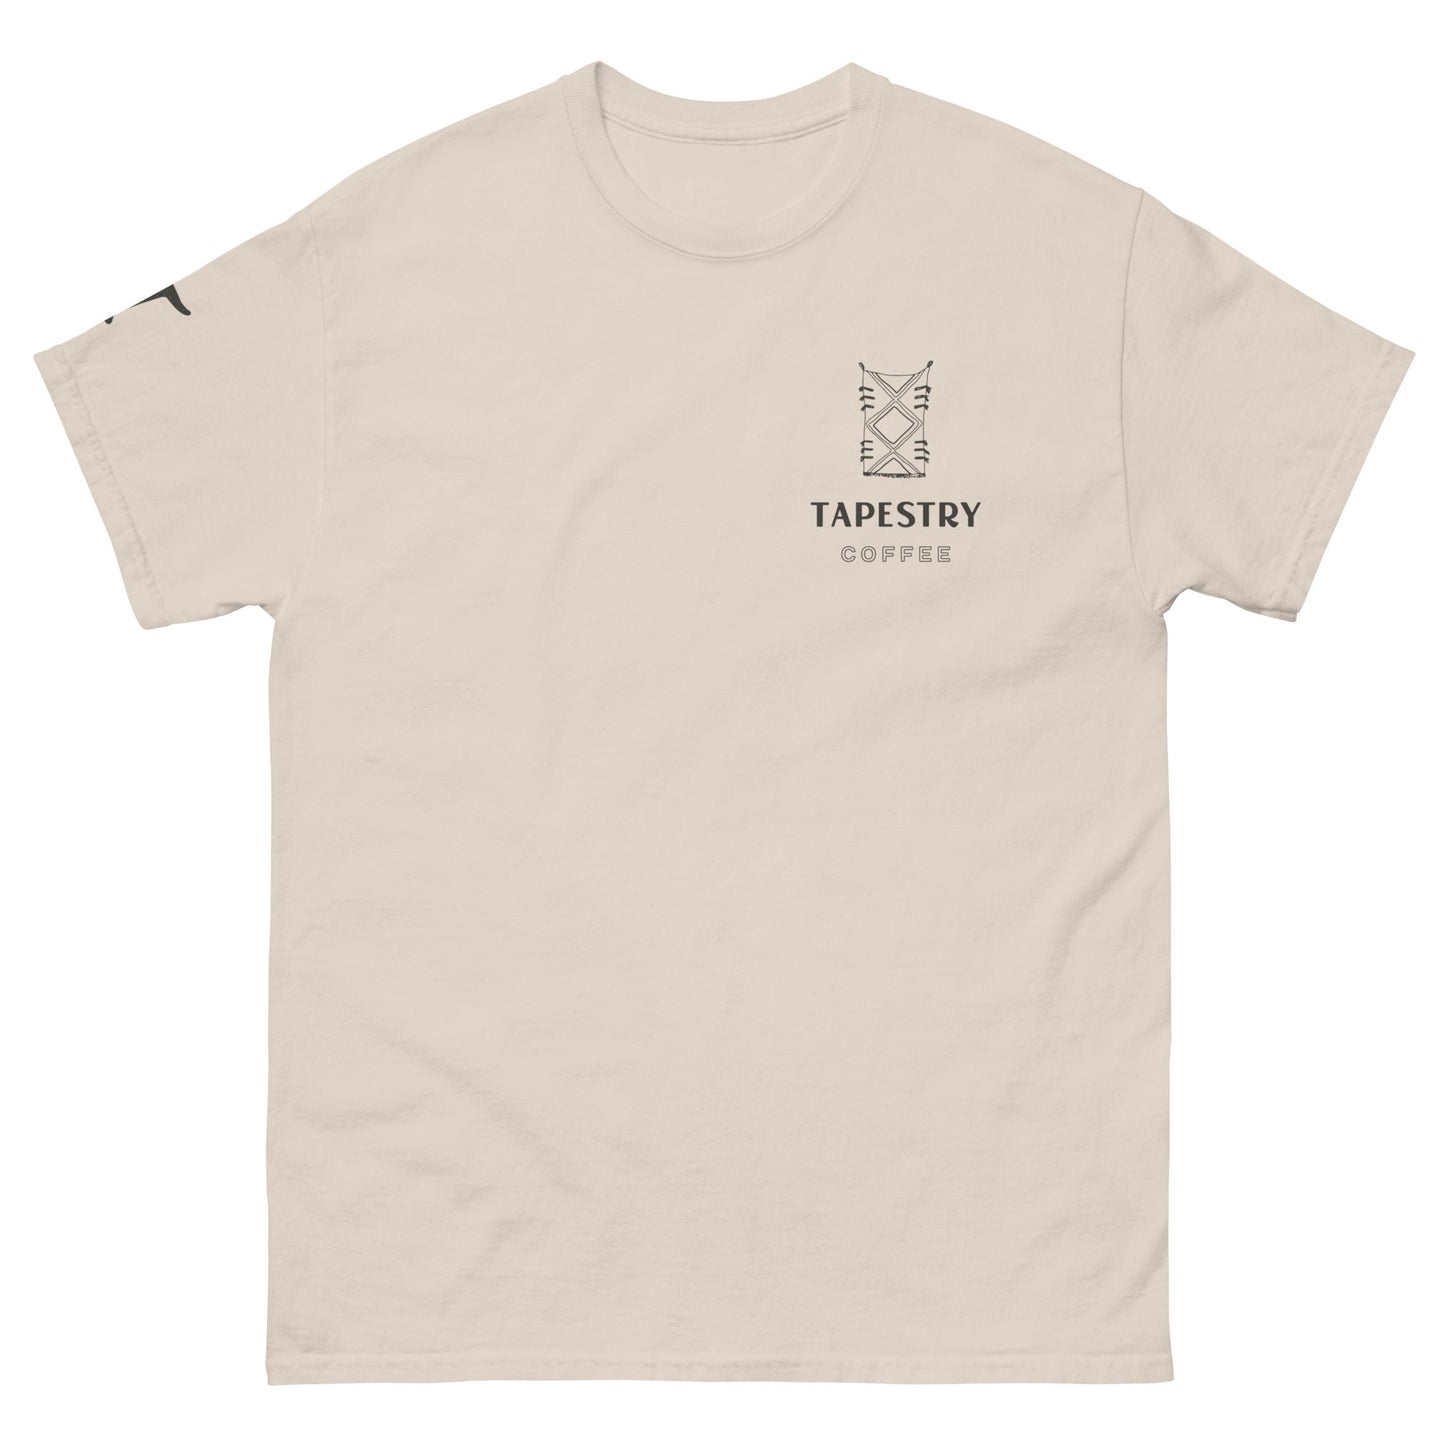 Tapestry T-Shirt - Tapestry Coffee